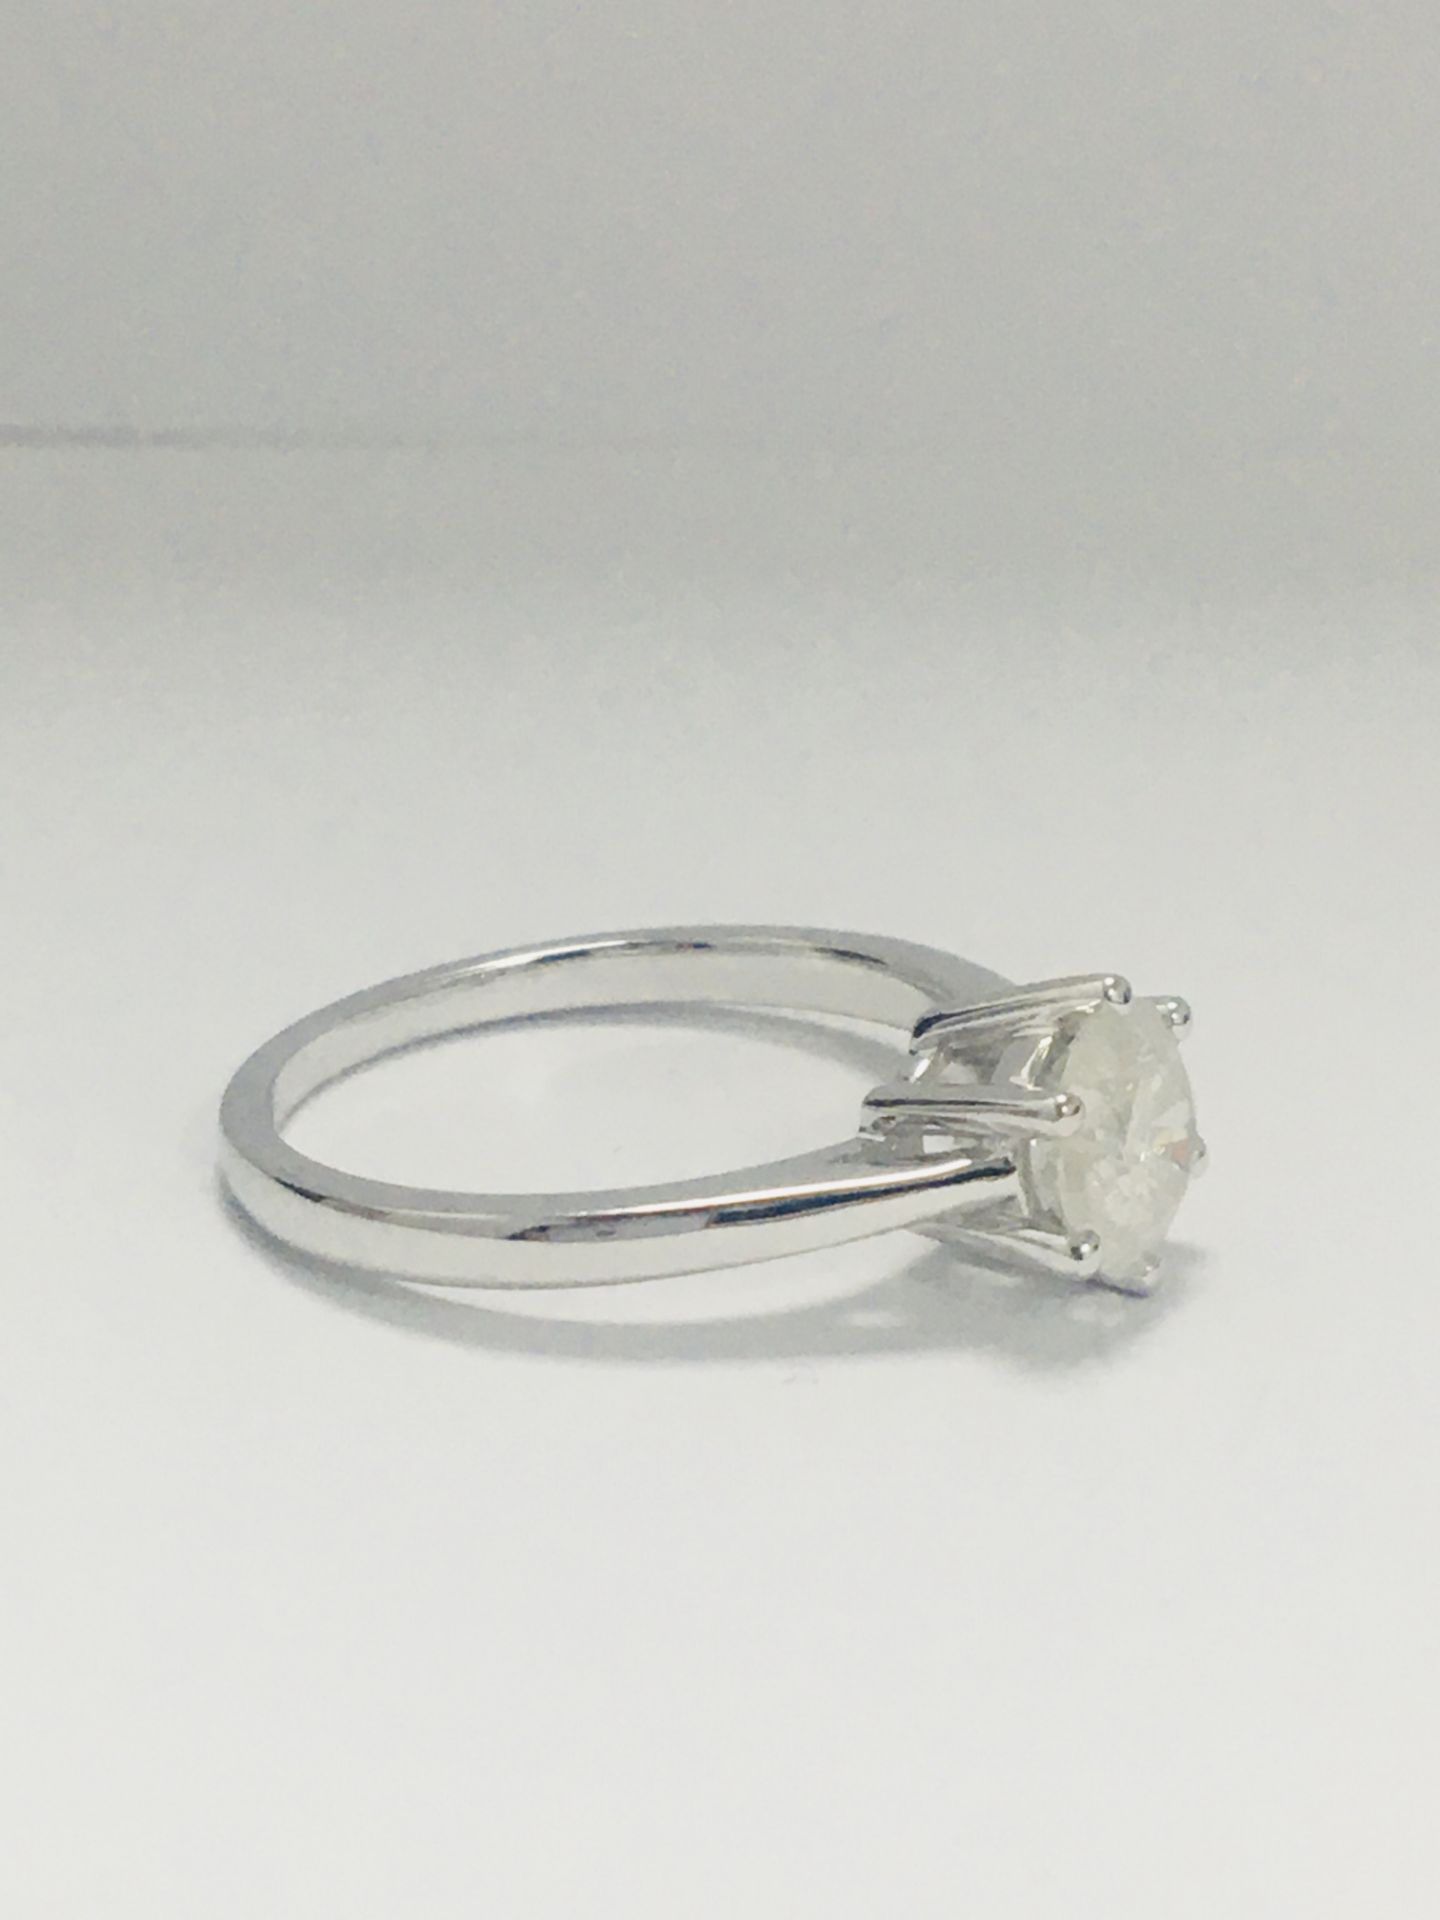 14Ct White Gold Diamond Solitaire Ring - Image 7 of 10